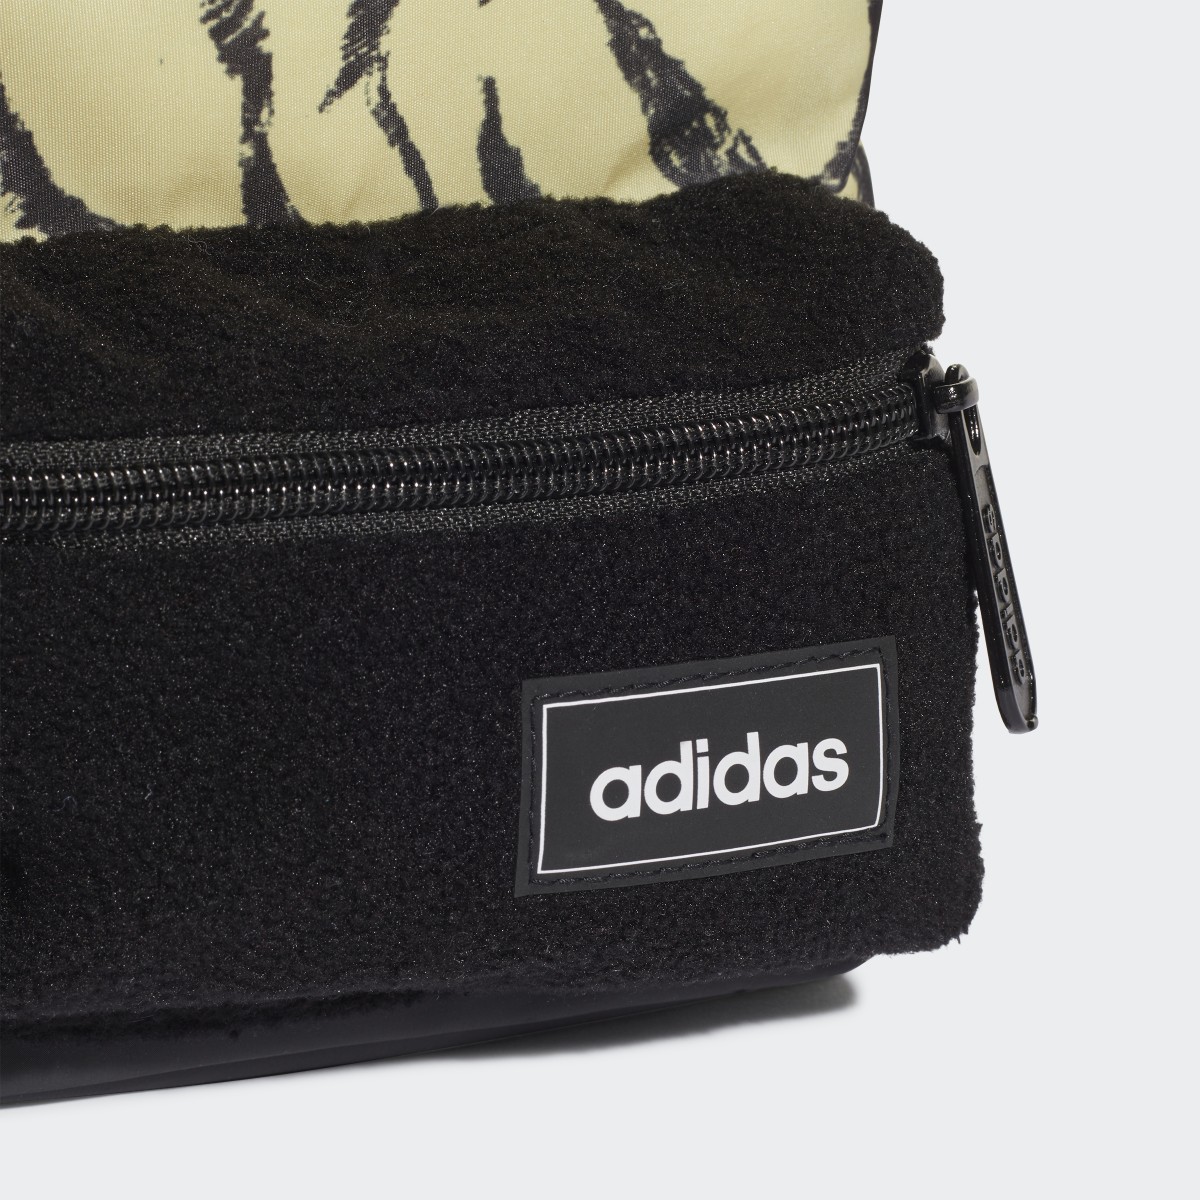 Adidas Mini sac à dos Tailored for Her Sport to Street Training. 6